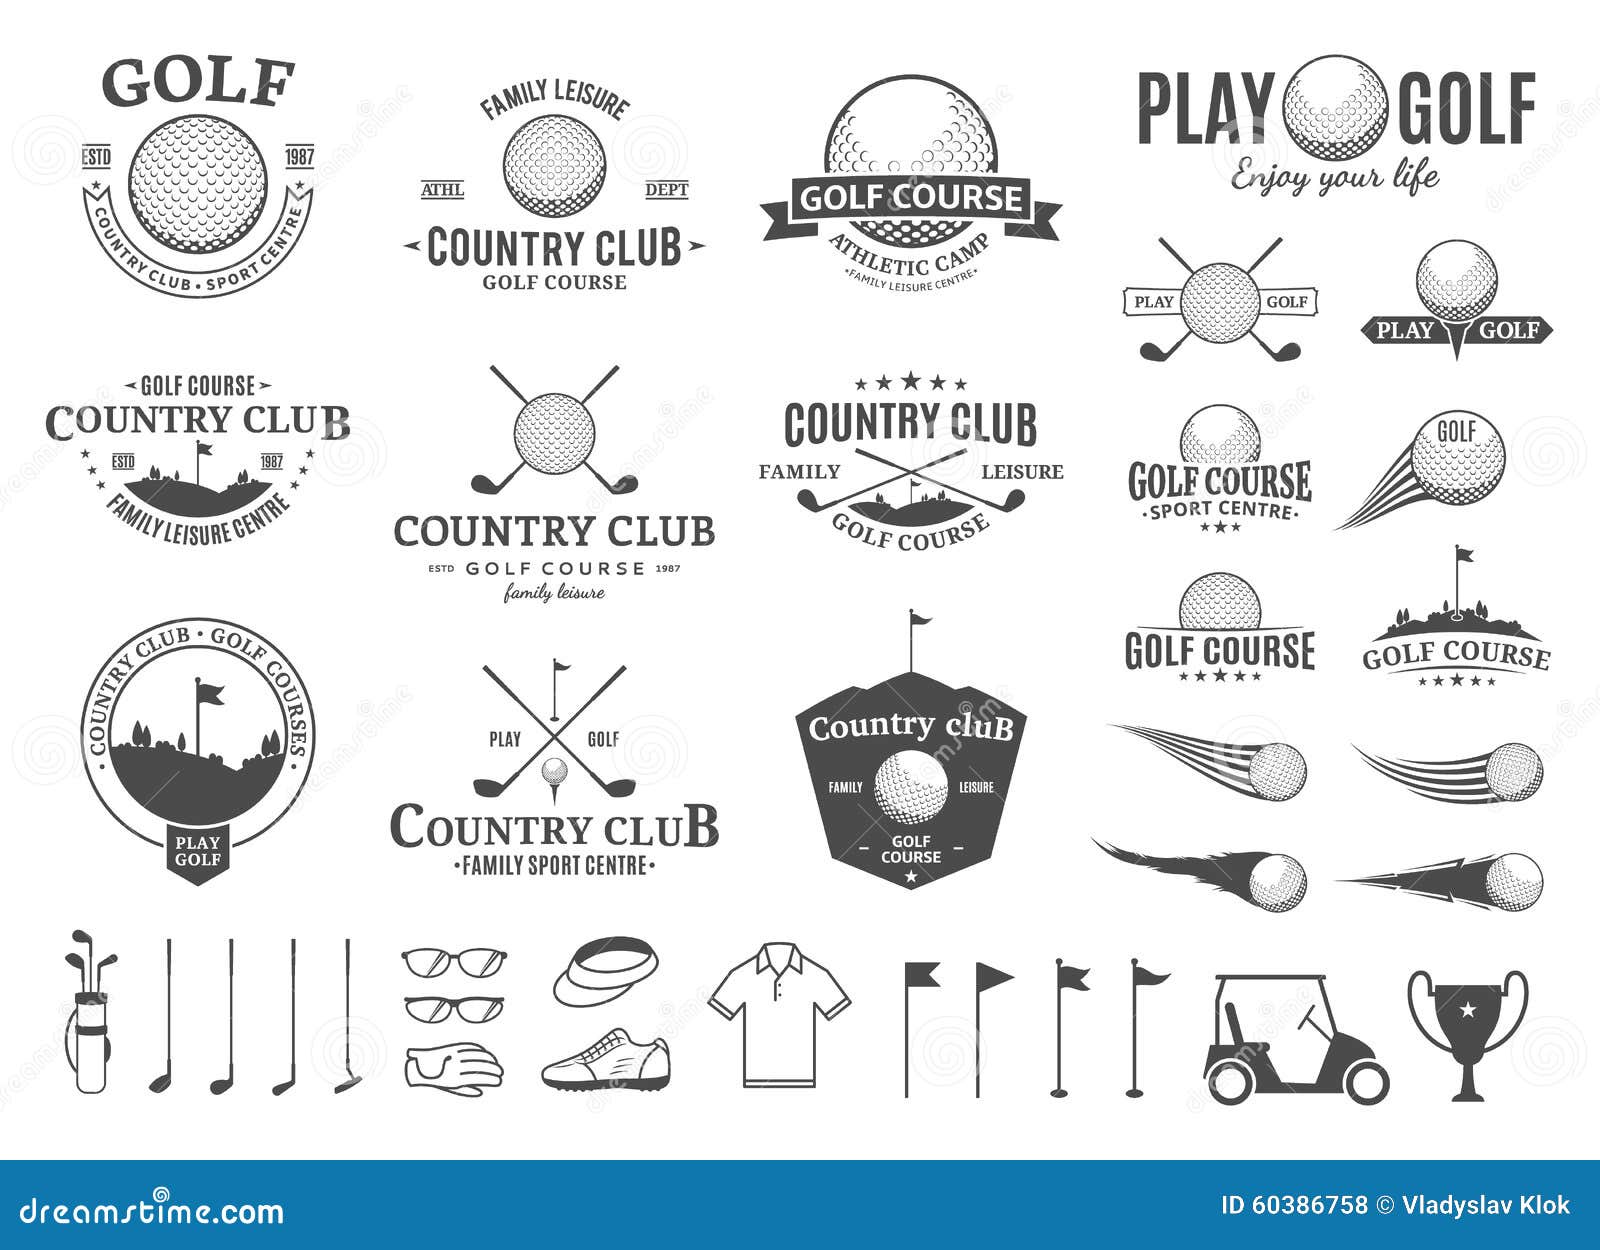 golf country club logo, labels, icons and  s